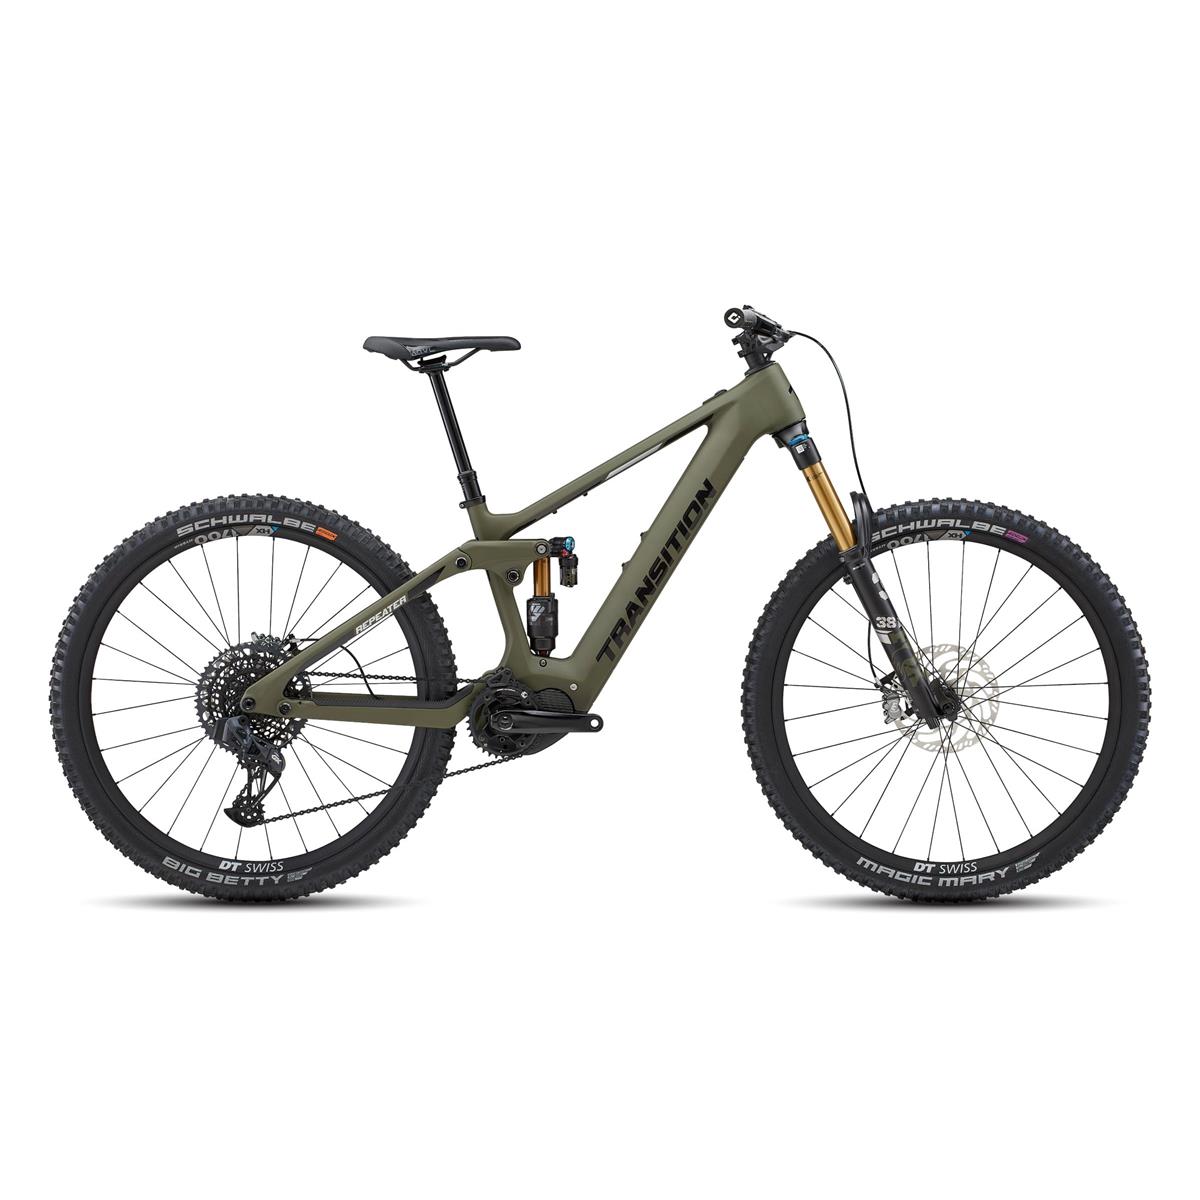 Repeater Carbon AXS 29'' 160mm 12s 630Wh Shimano EP8 Mossy Green Größe XL